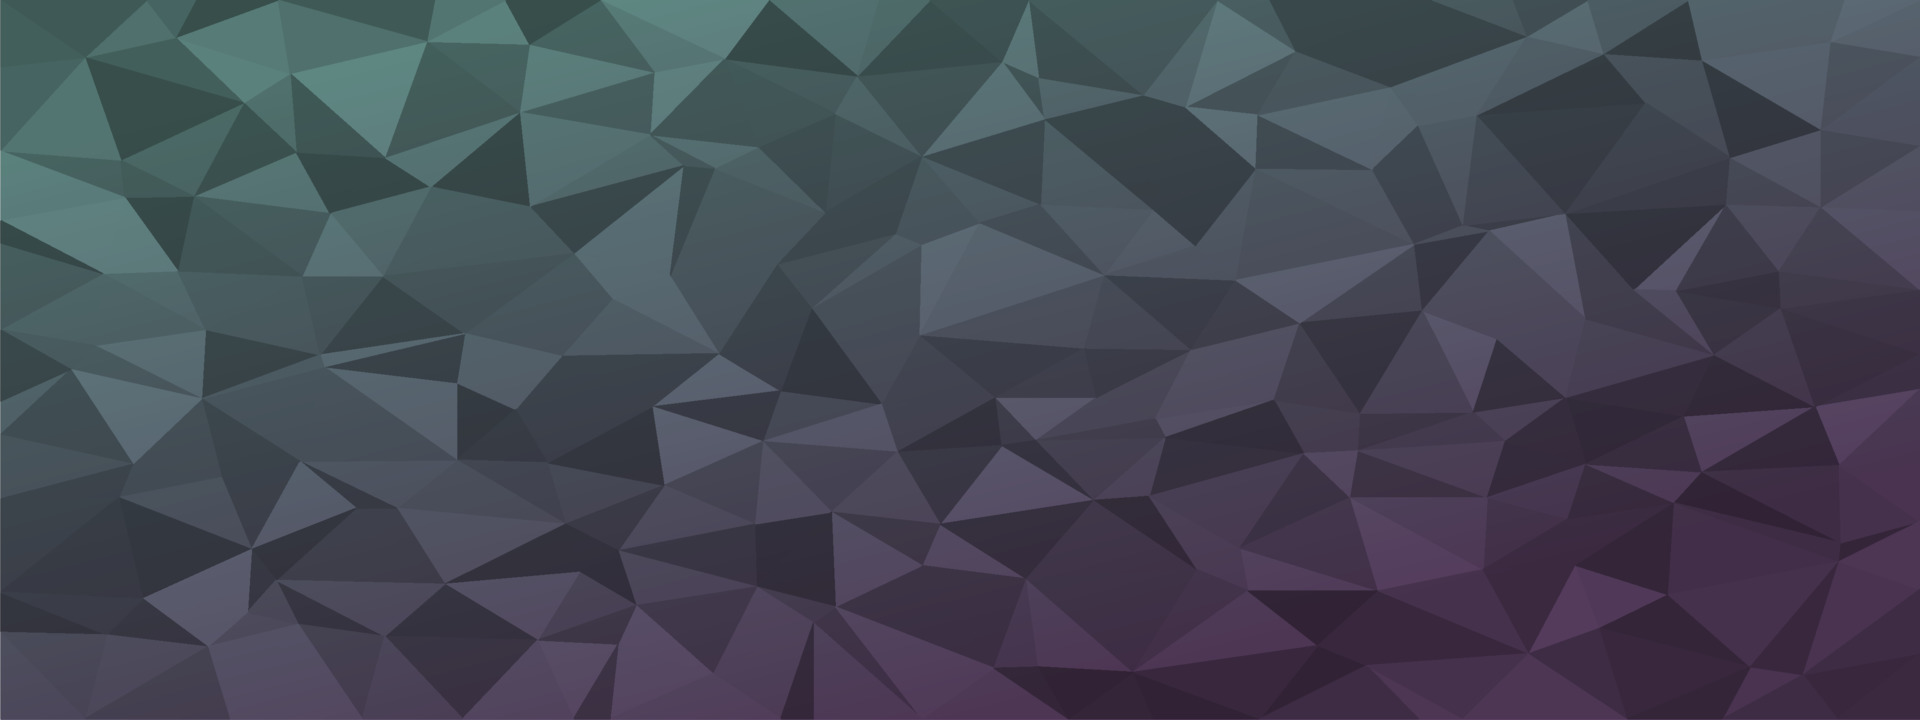 Download wallpapers purple low poly background abstract crystals colorful  backgrounds creative colorful background geometric art low poly  patterns low poly background geometric shapes low poly art for desktop  free Pictures for desktop